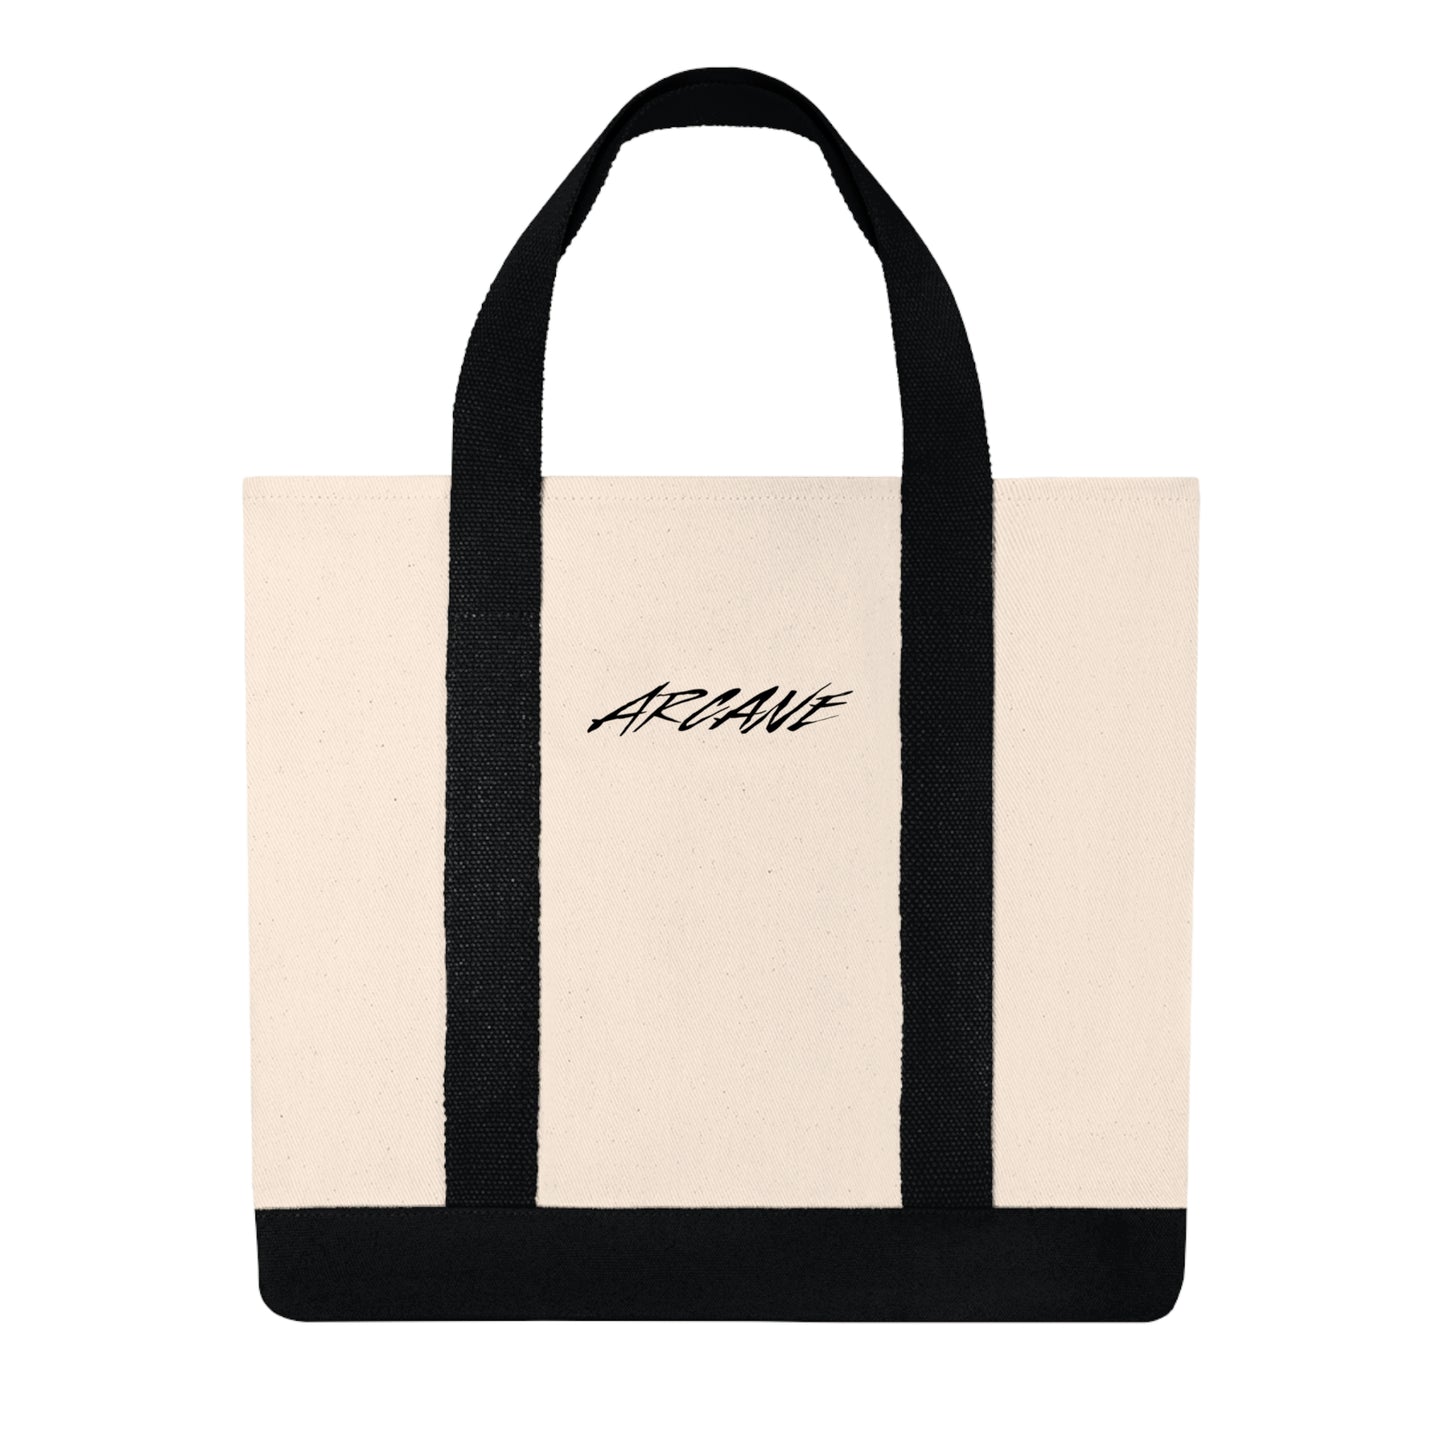 Arcane Embroidered Shopping Tote